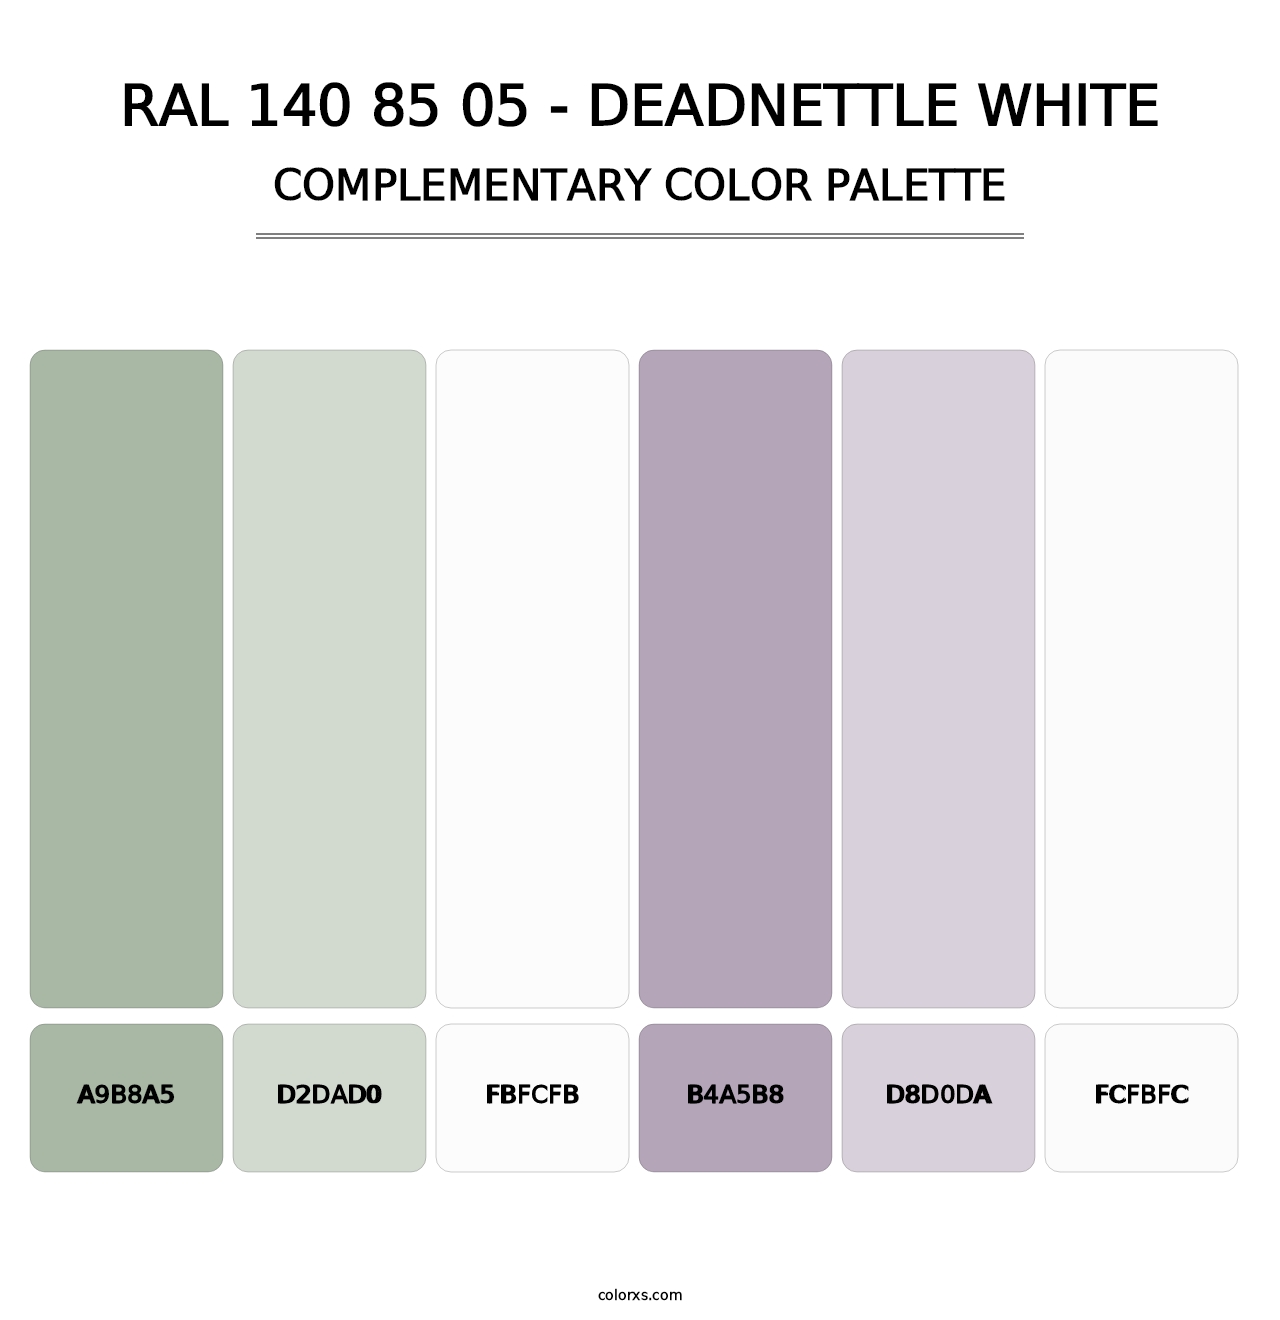 RAL 140 85 05 - Deadnettle White - Complementary Color Palette